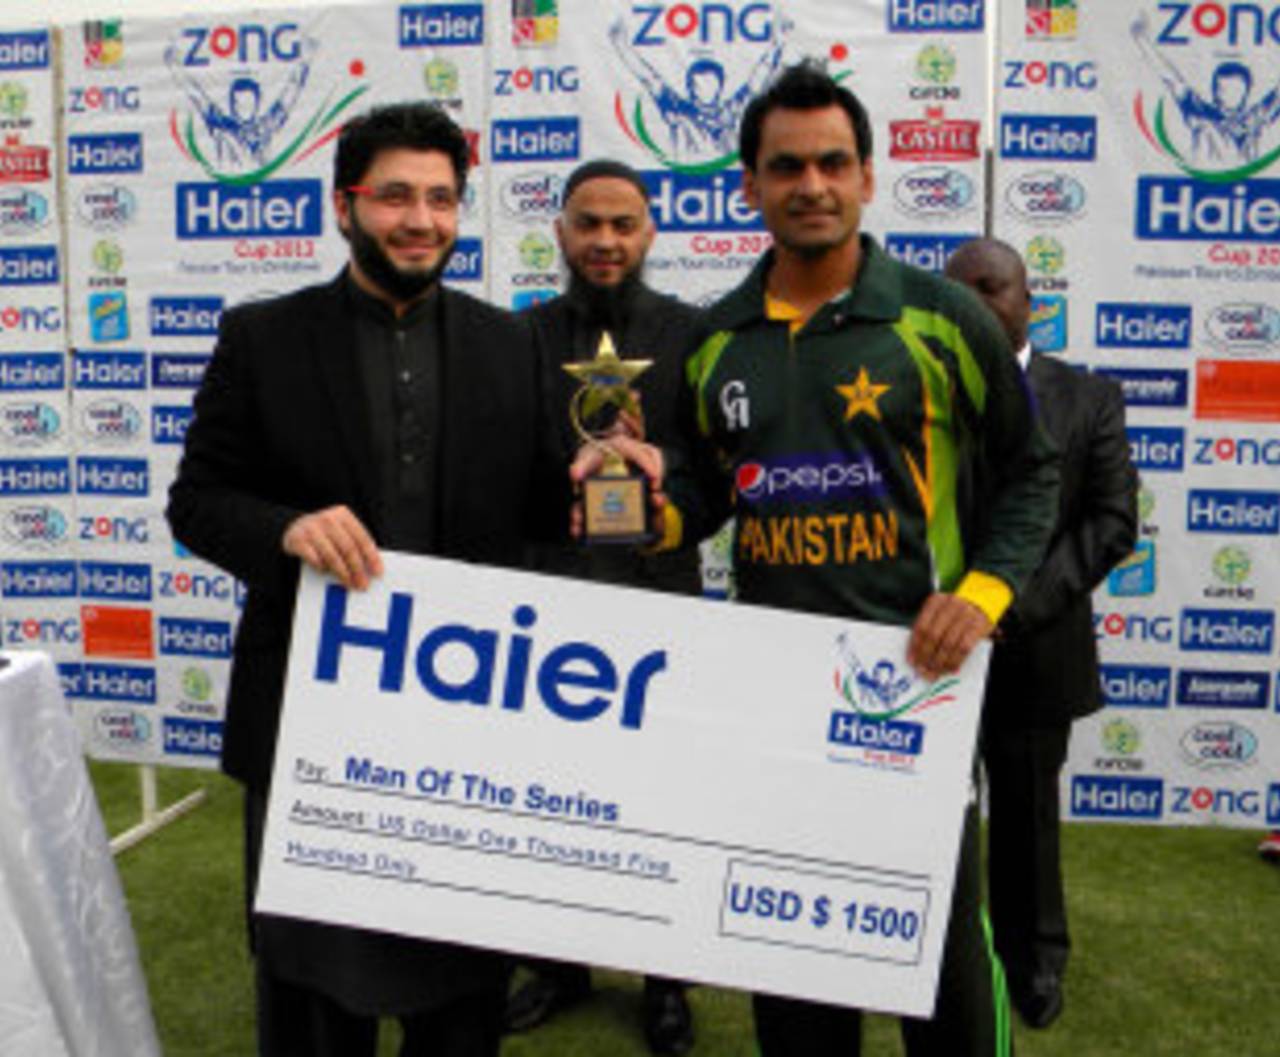 Mohammad Hafeez made 232 runs and picked up two wickets in three matches against Zimbabwe&nbsp;&nbsp;&bull;&nbsp;&nbsp;Nouman Ahmed